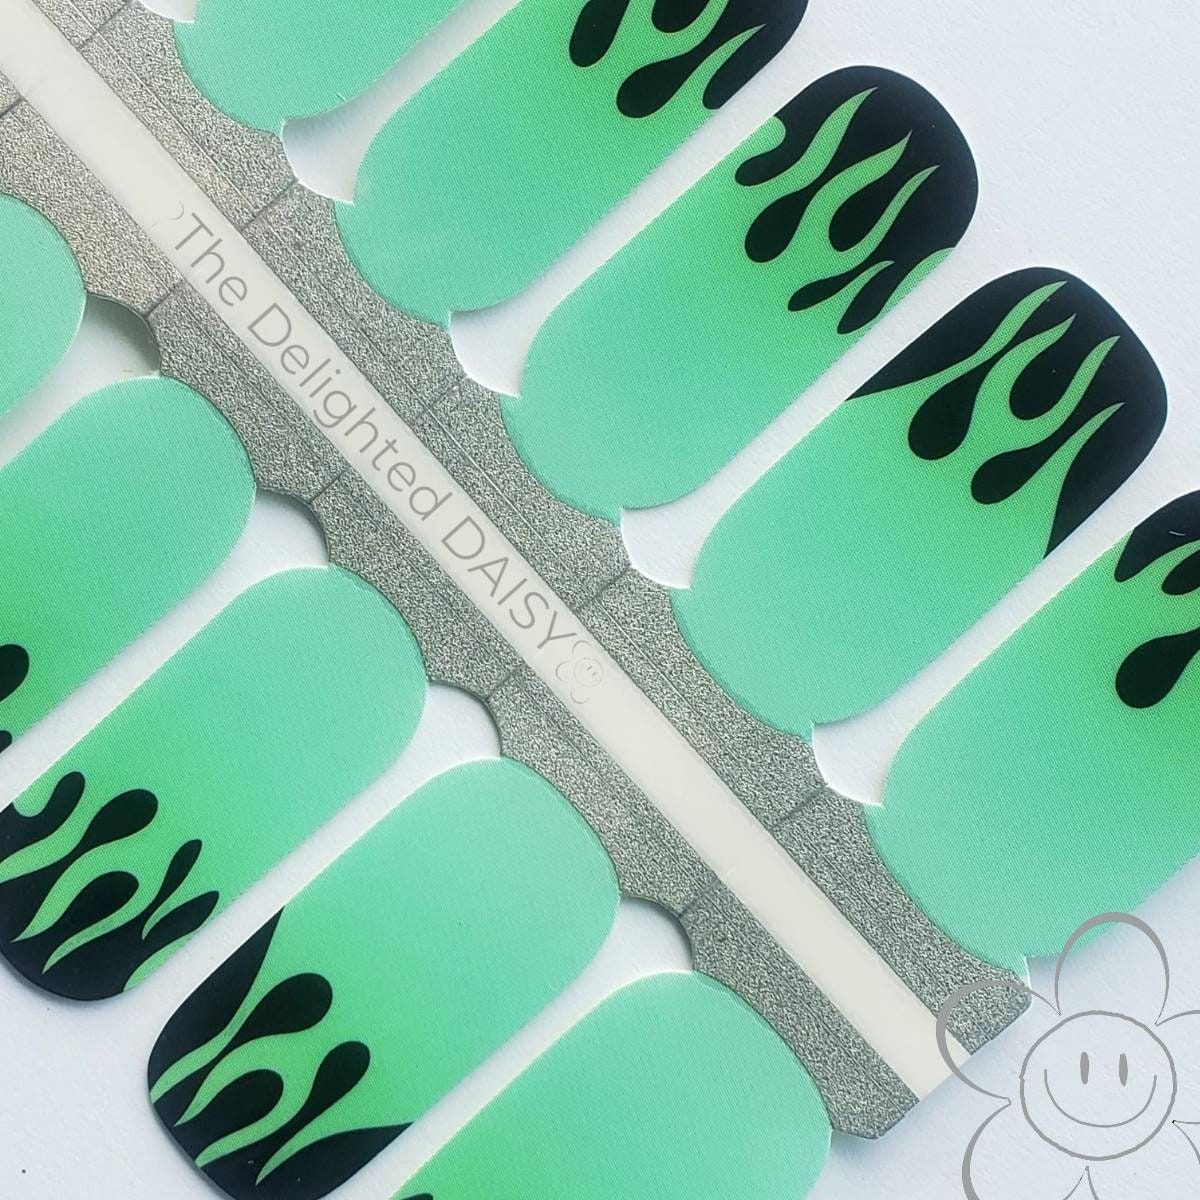 Up in Flames Nail Wraps, Strips, Sticker, Art von Etsy - TheDelightedDaisy